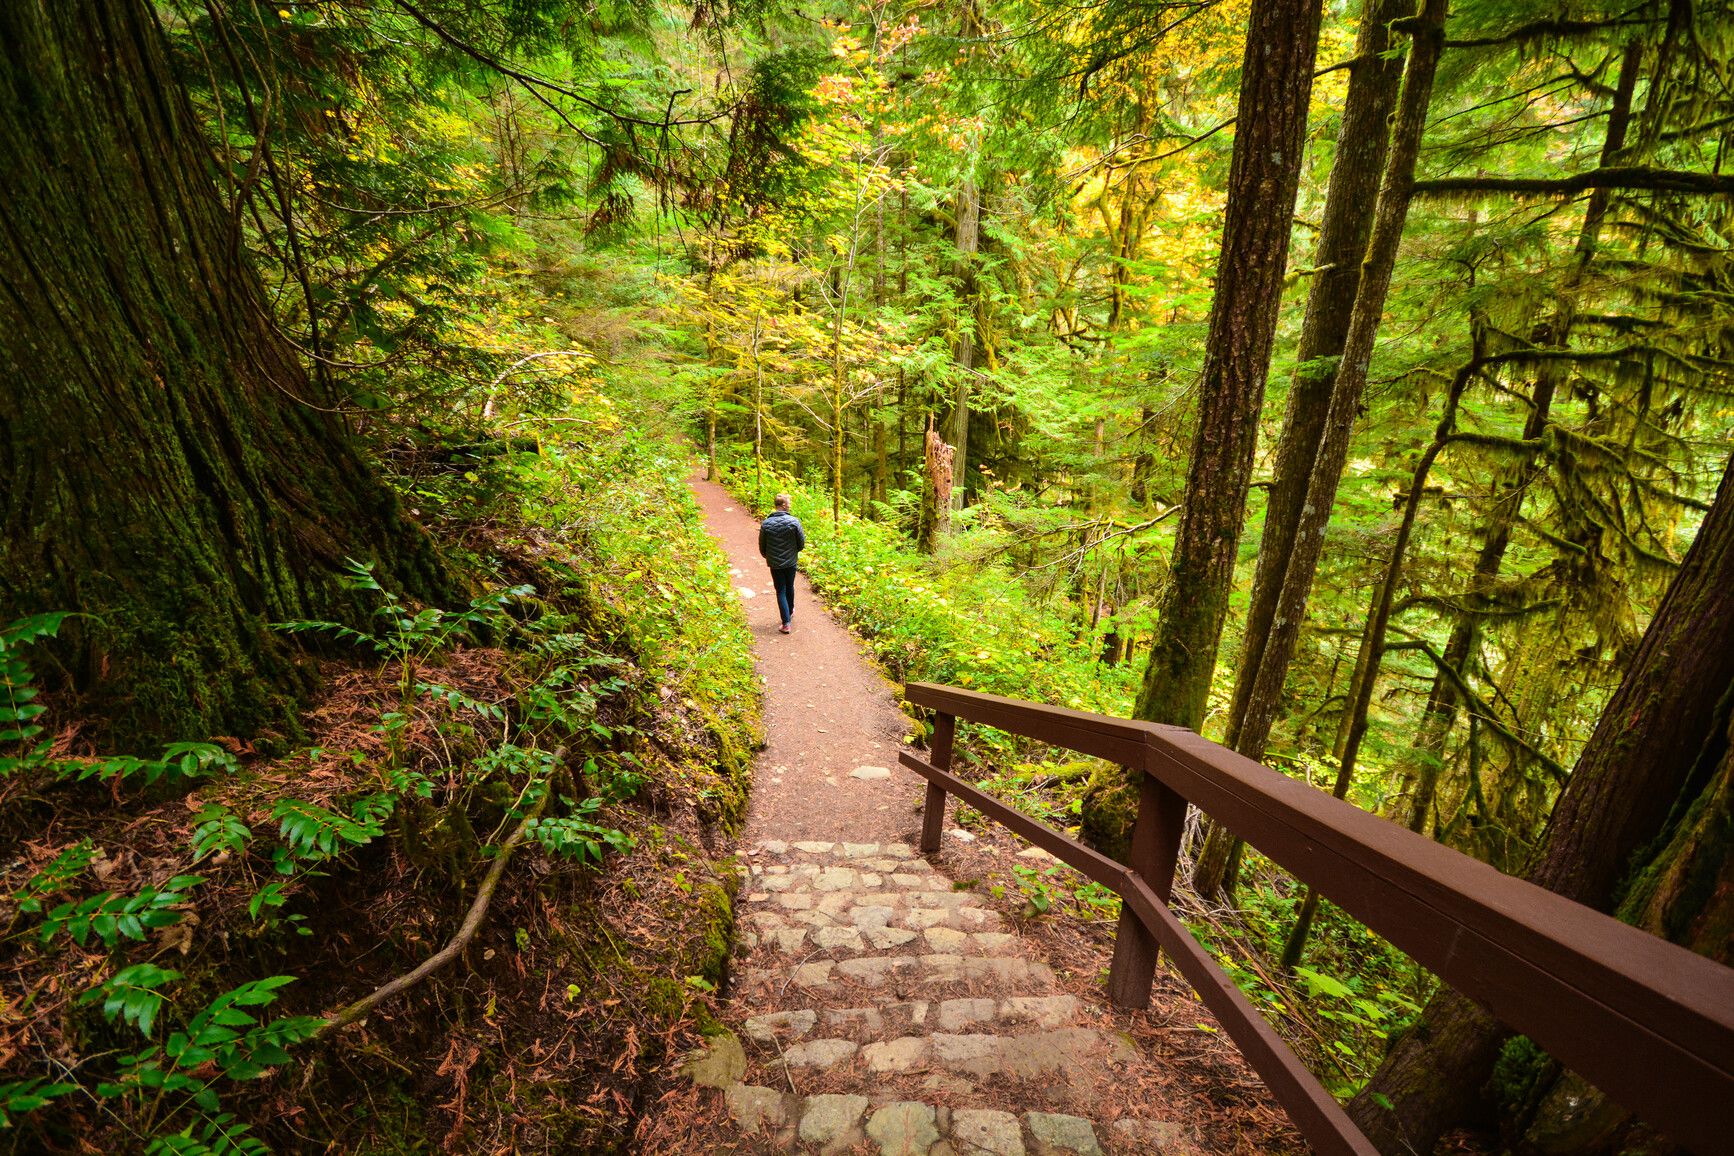 A park visitor walks a forest trail with stone steps. Old trees in the trail in Englishman River Falls Park.